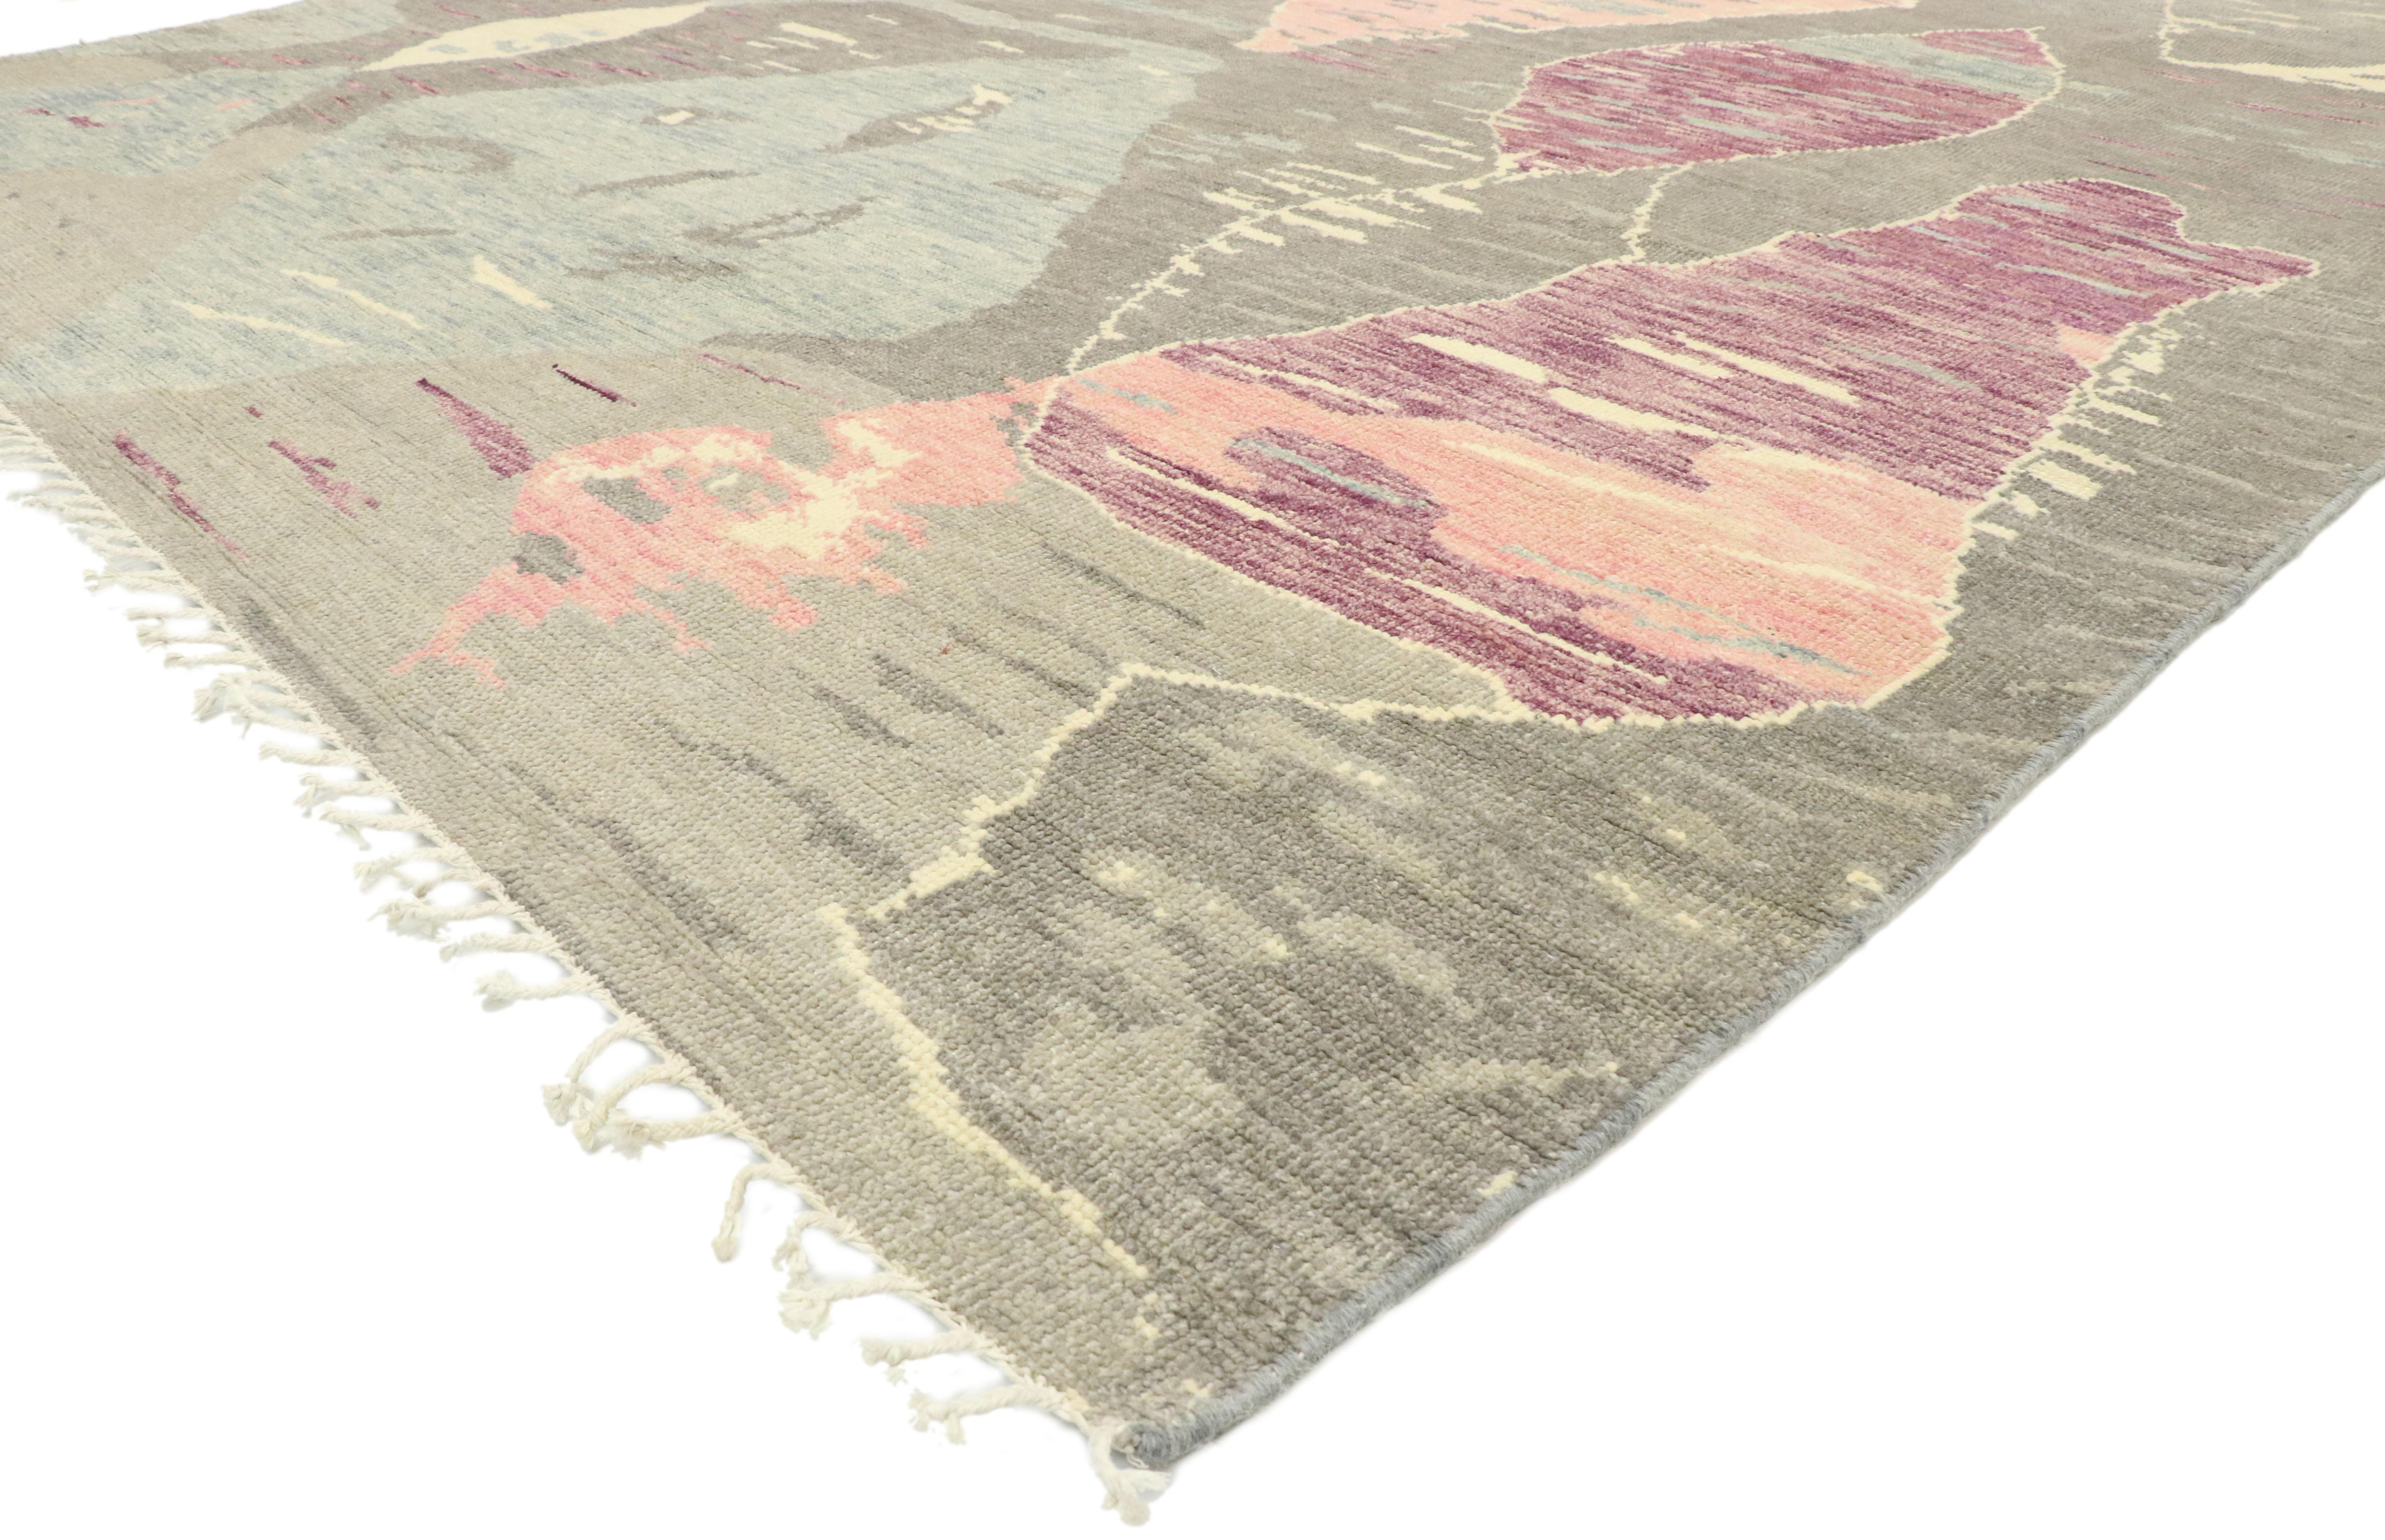 80633, new contemporary Moroccan Area rug with Postmodern style in pastel colors. Pastel hue diamonds appear suspended against a gray hued backdrop in this hand knotted wool contemporary Moroccan style rug. Mirroring striations create the effect of